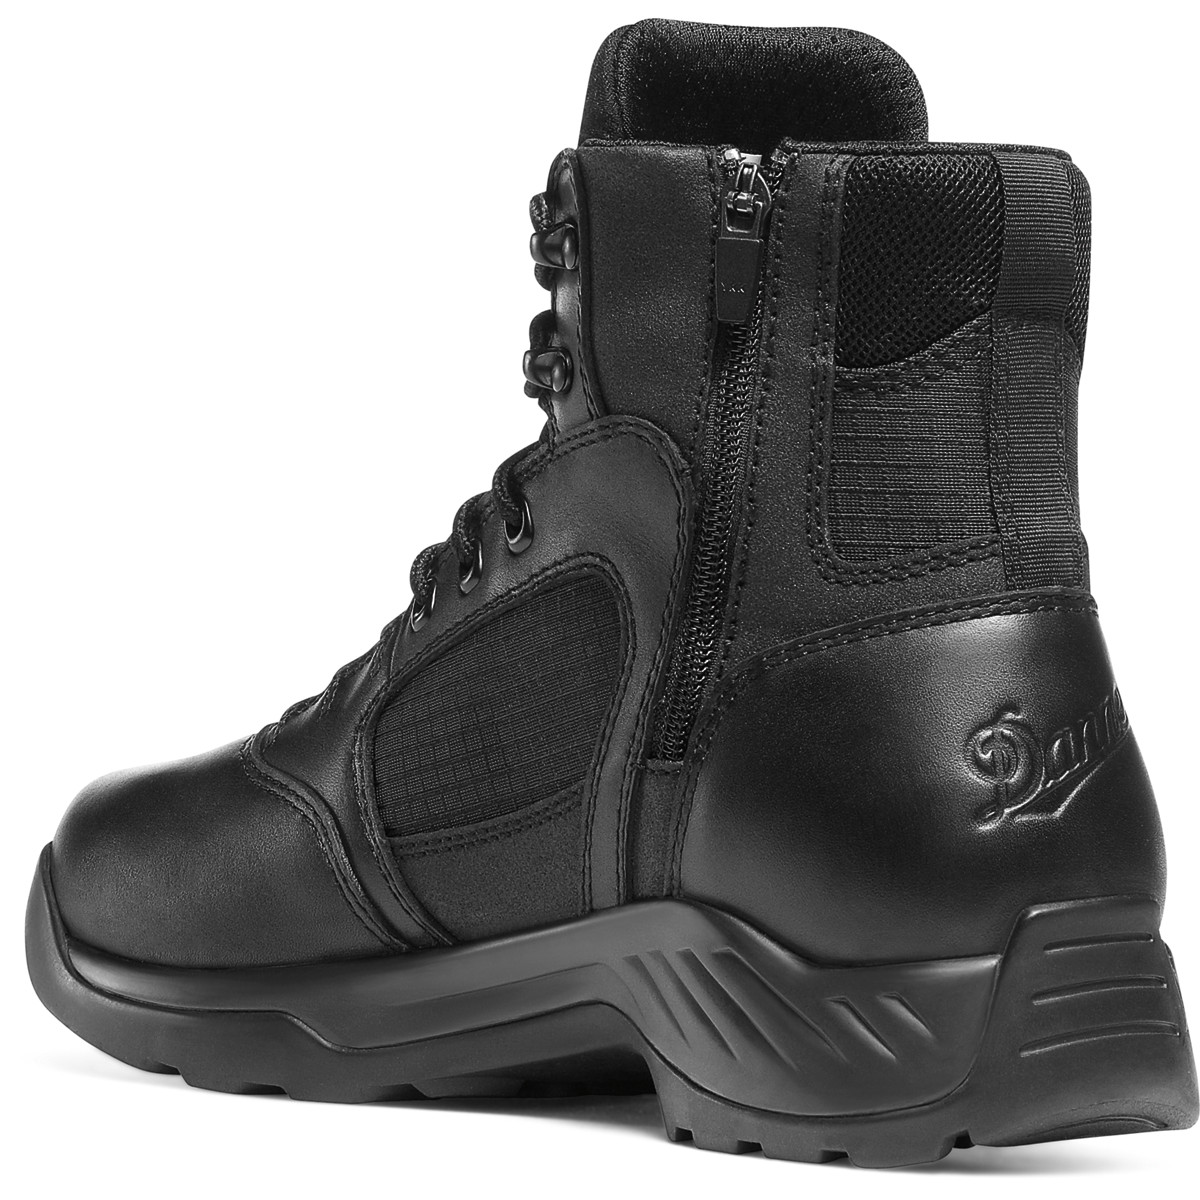 Danner Kinetic 6" Side-Zip GTX Black Work Boots All Sizes Available 28017 